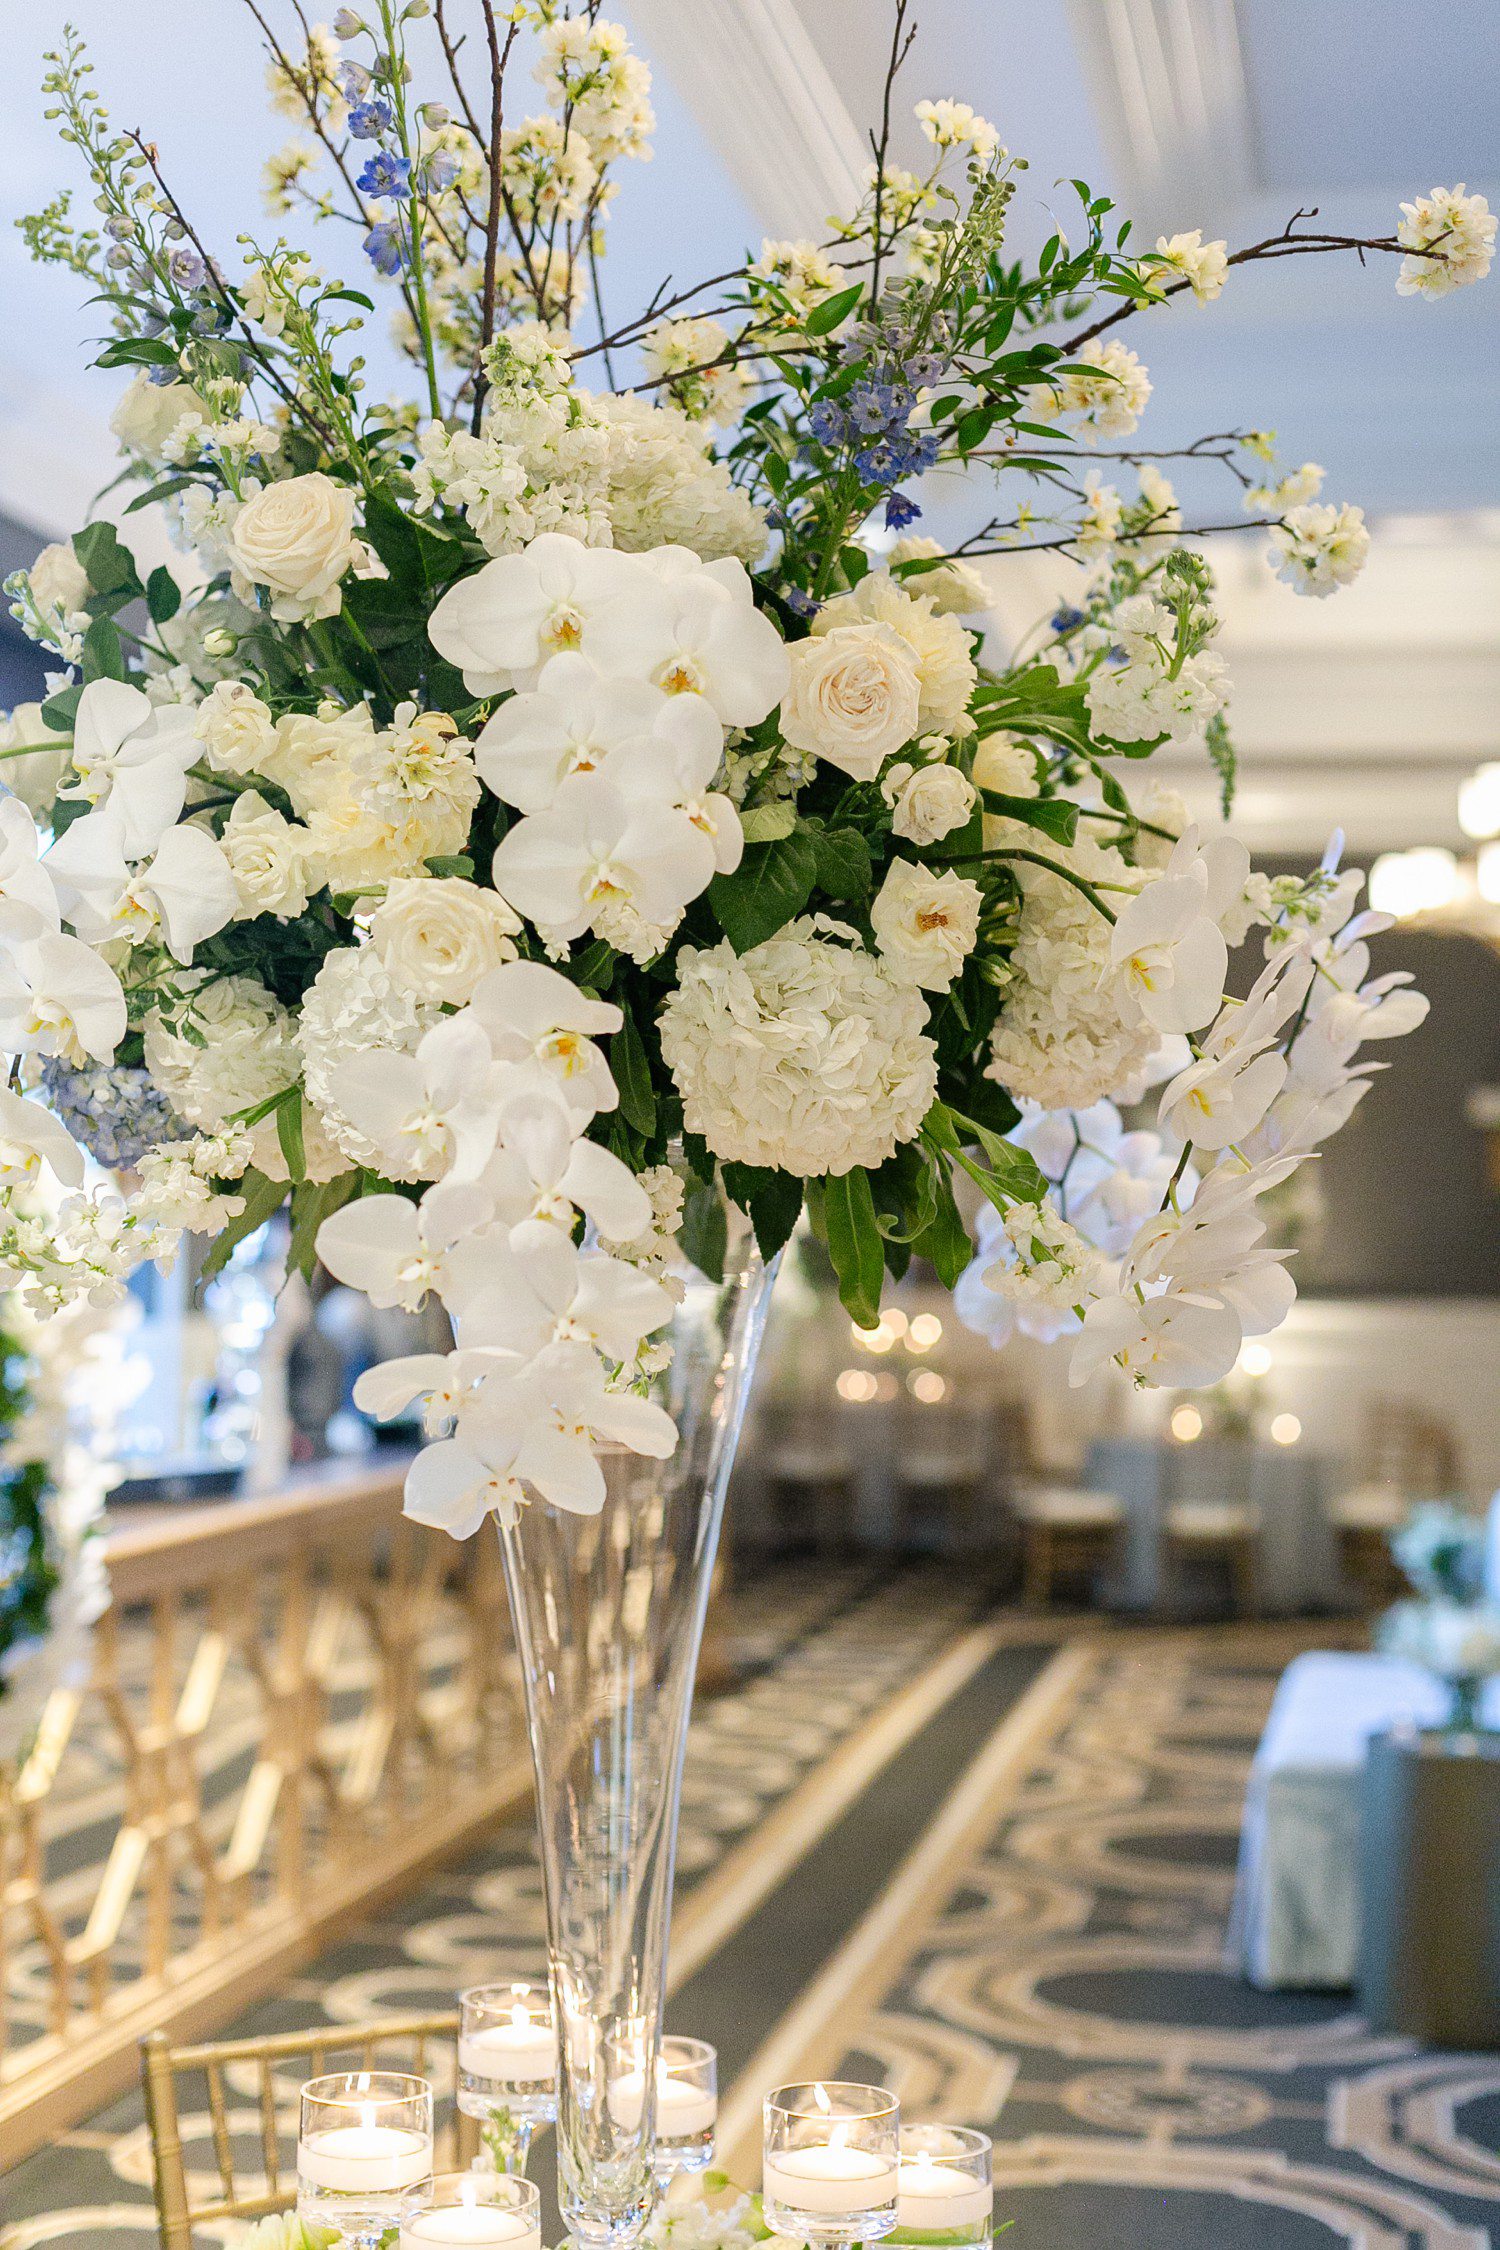 White orchid and white flowers for wedding reception table centerpiece.